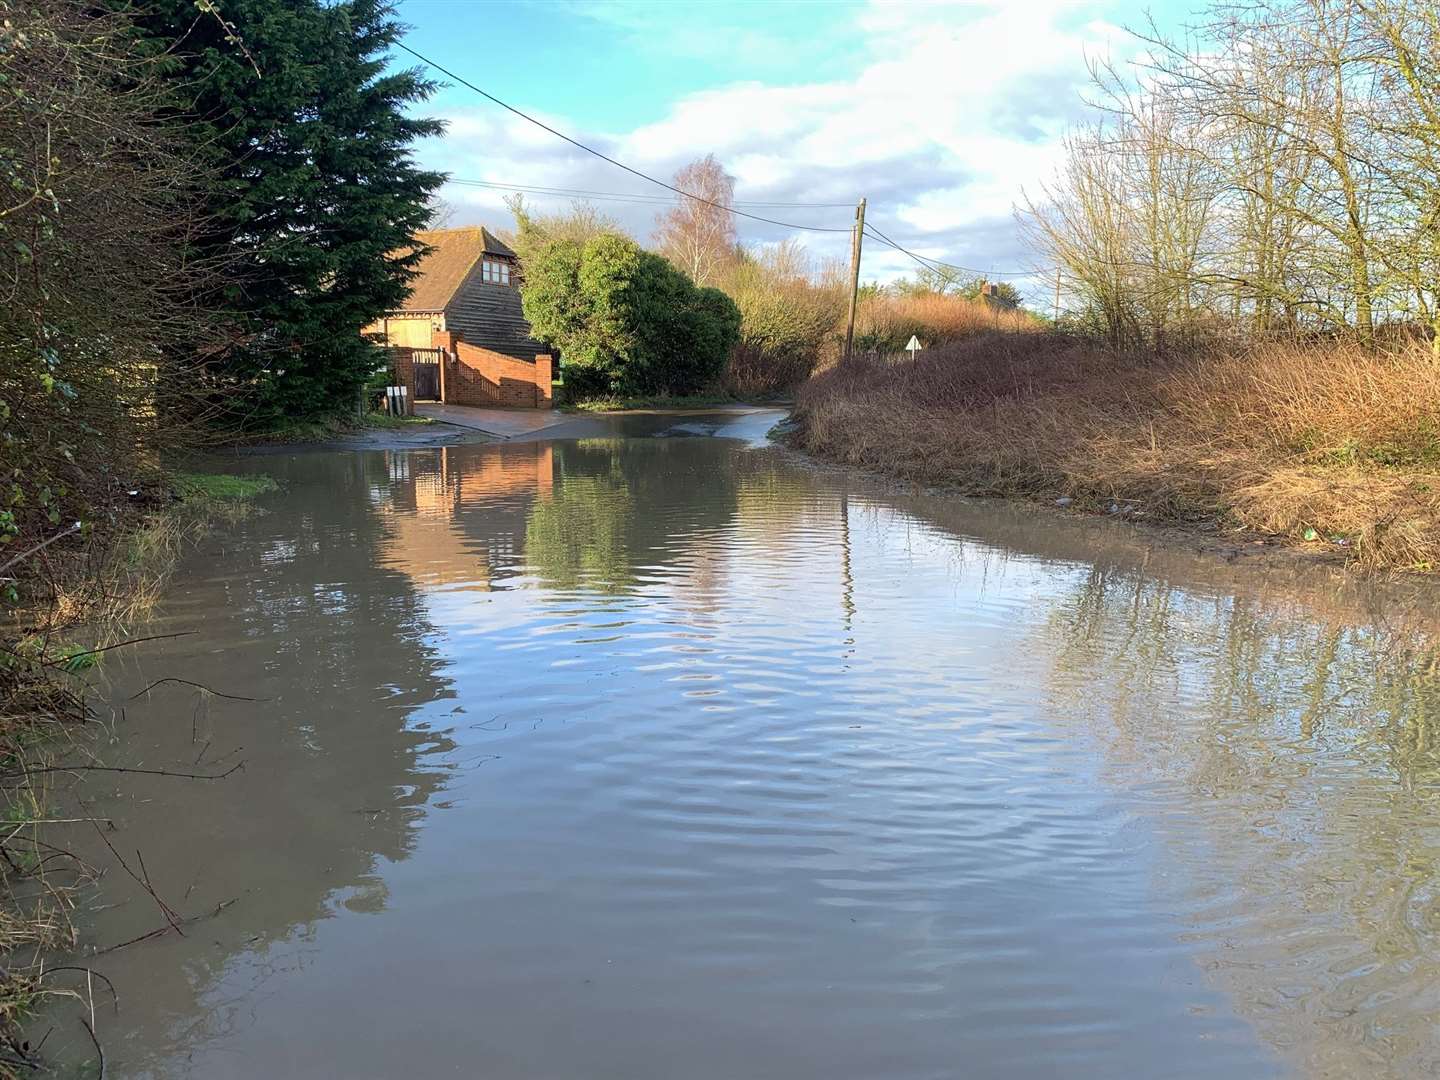 Church Road in Sevington is badly flooded